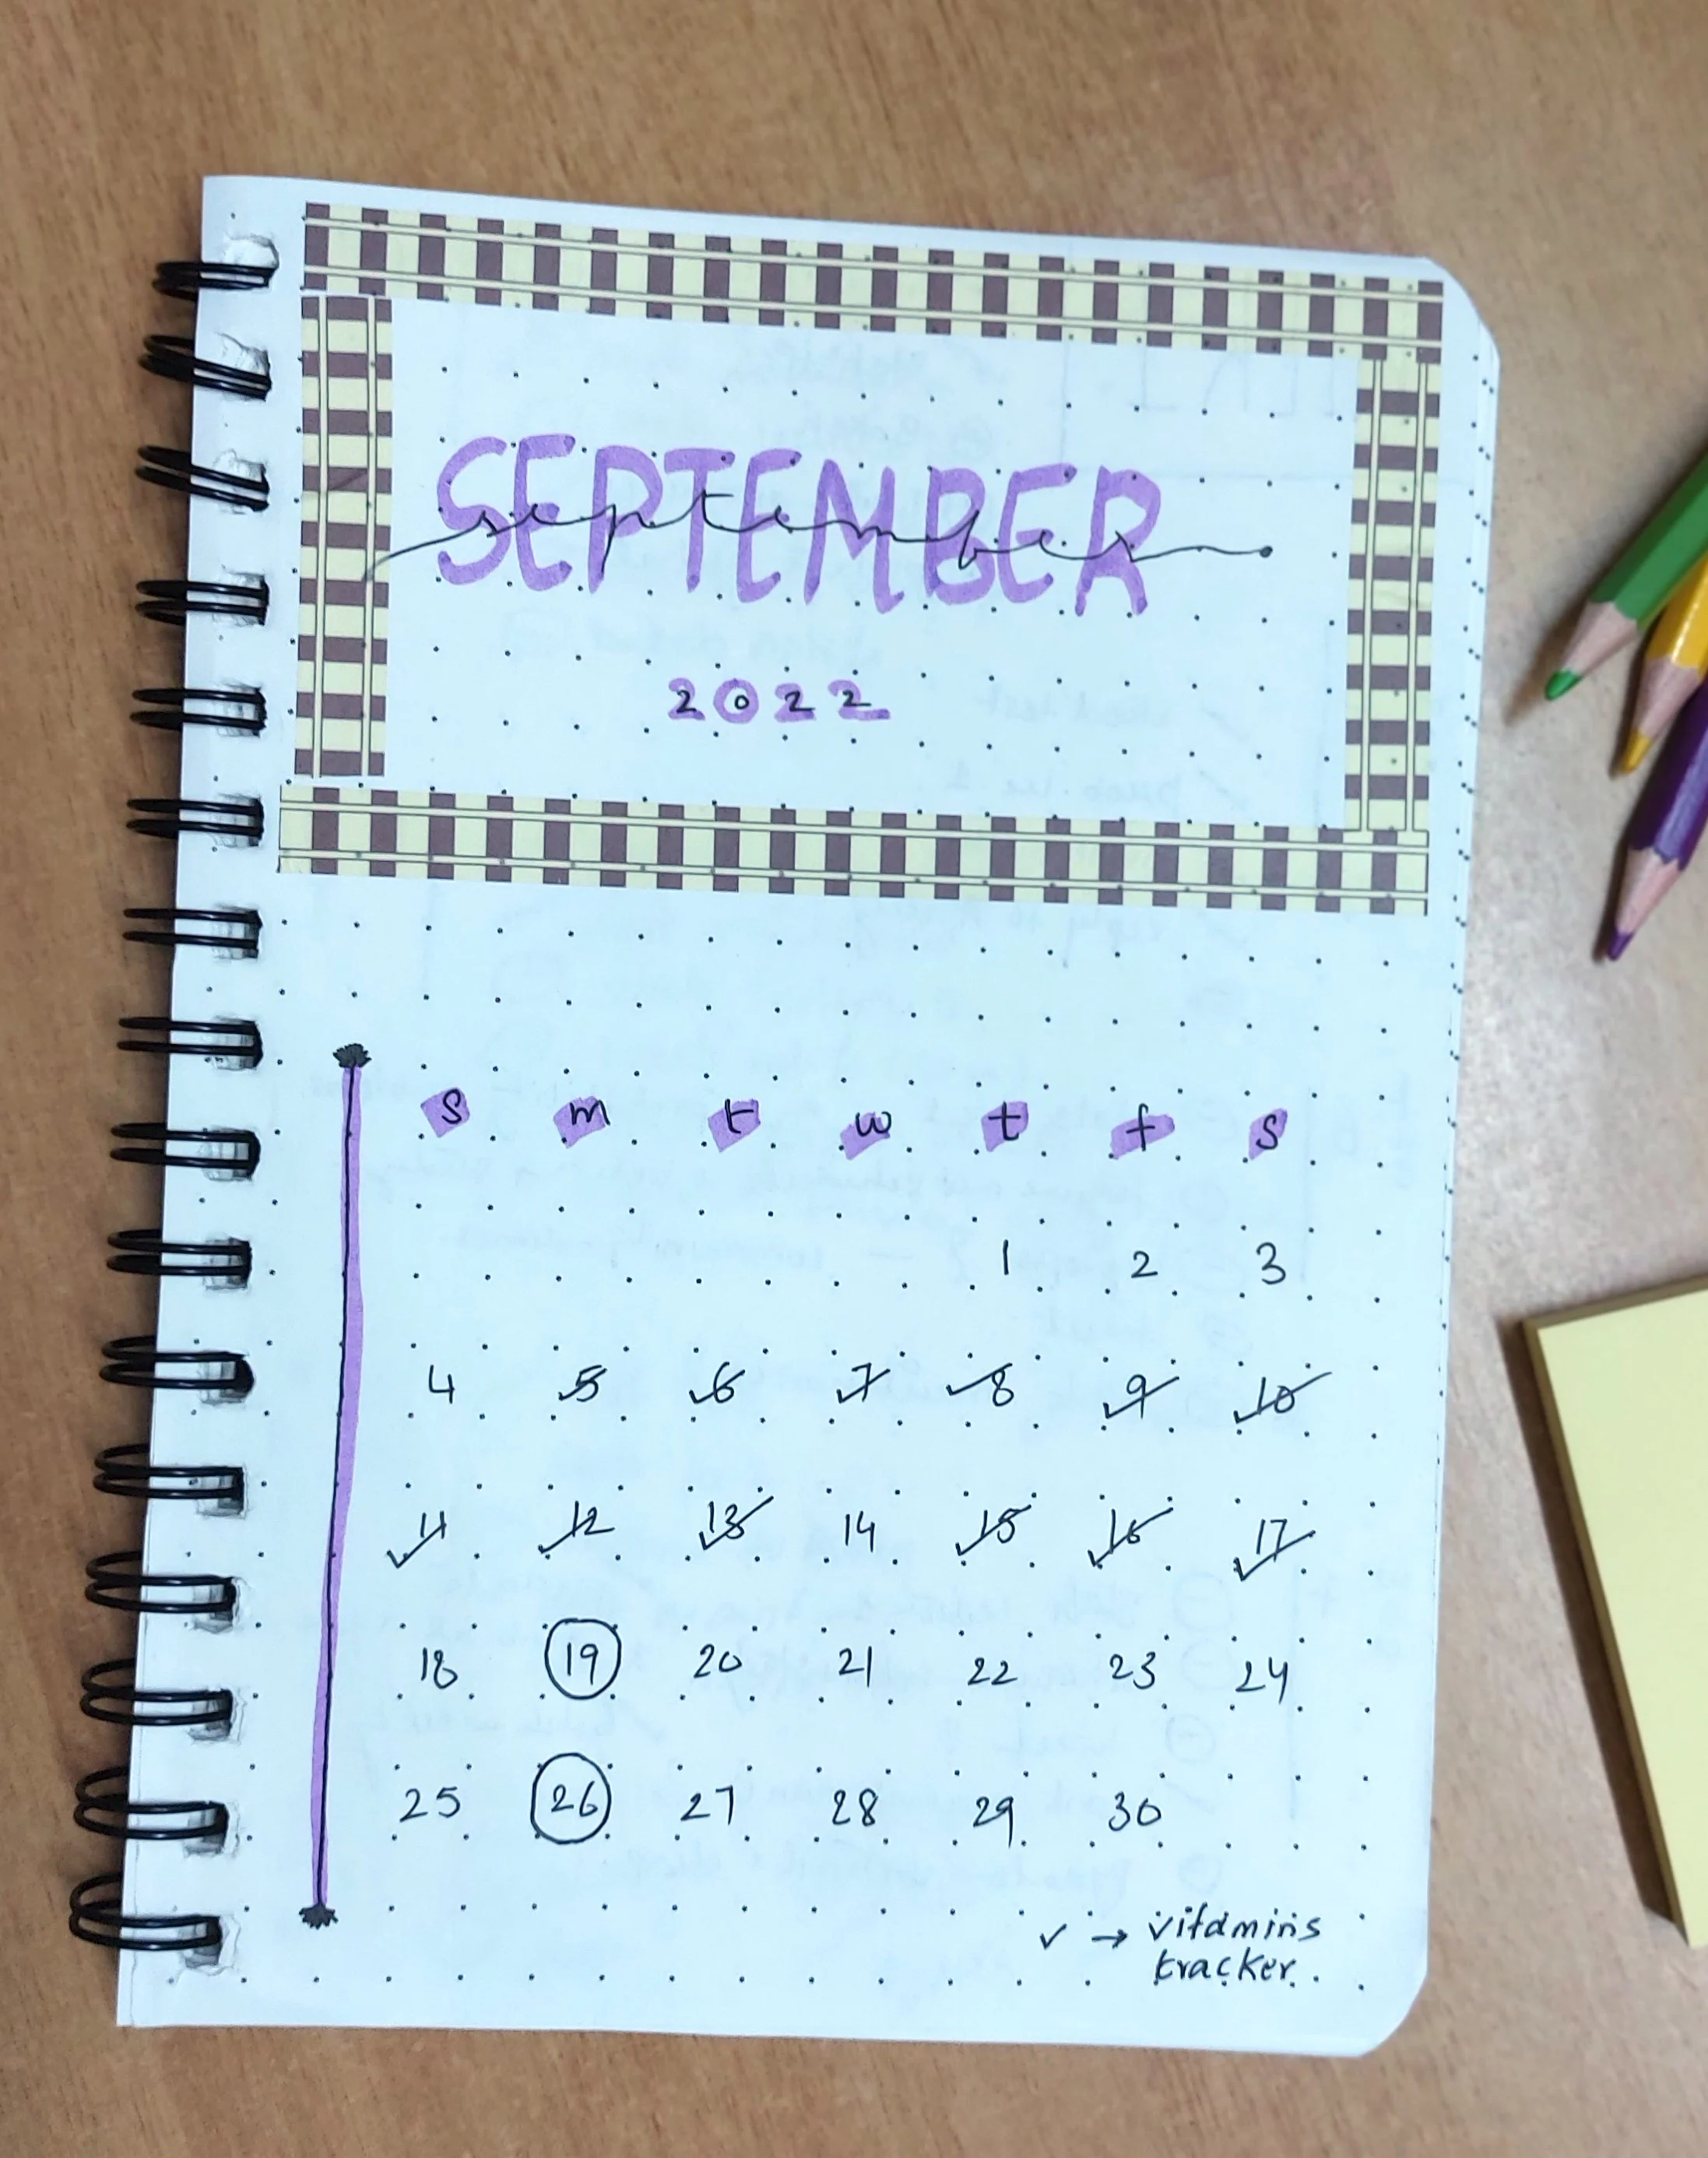 In the top half, &lsquo;September 2022&rsquo; written in big block letters within a border created with decorative tape. Botton half has the monthly calendar with some dates ticked tracking vitamins.